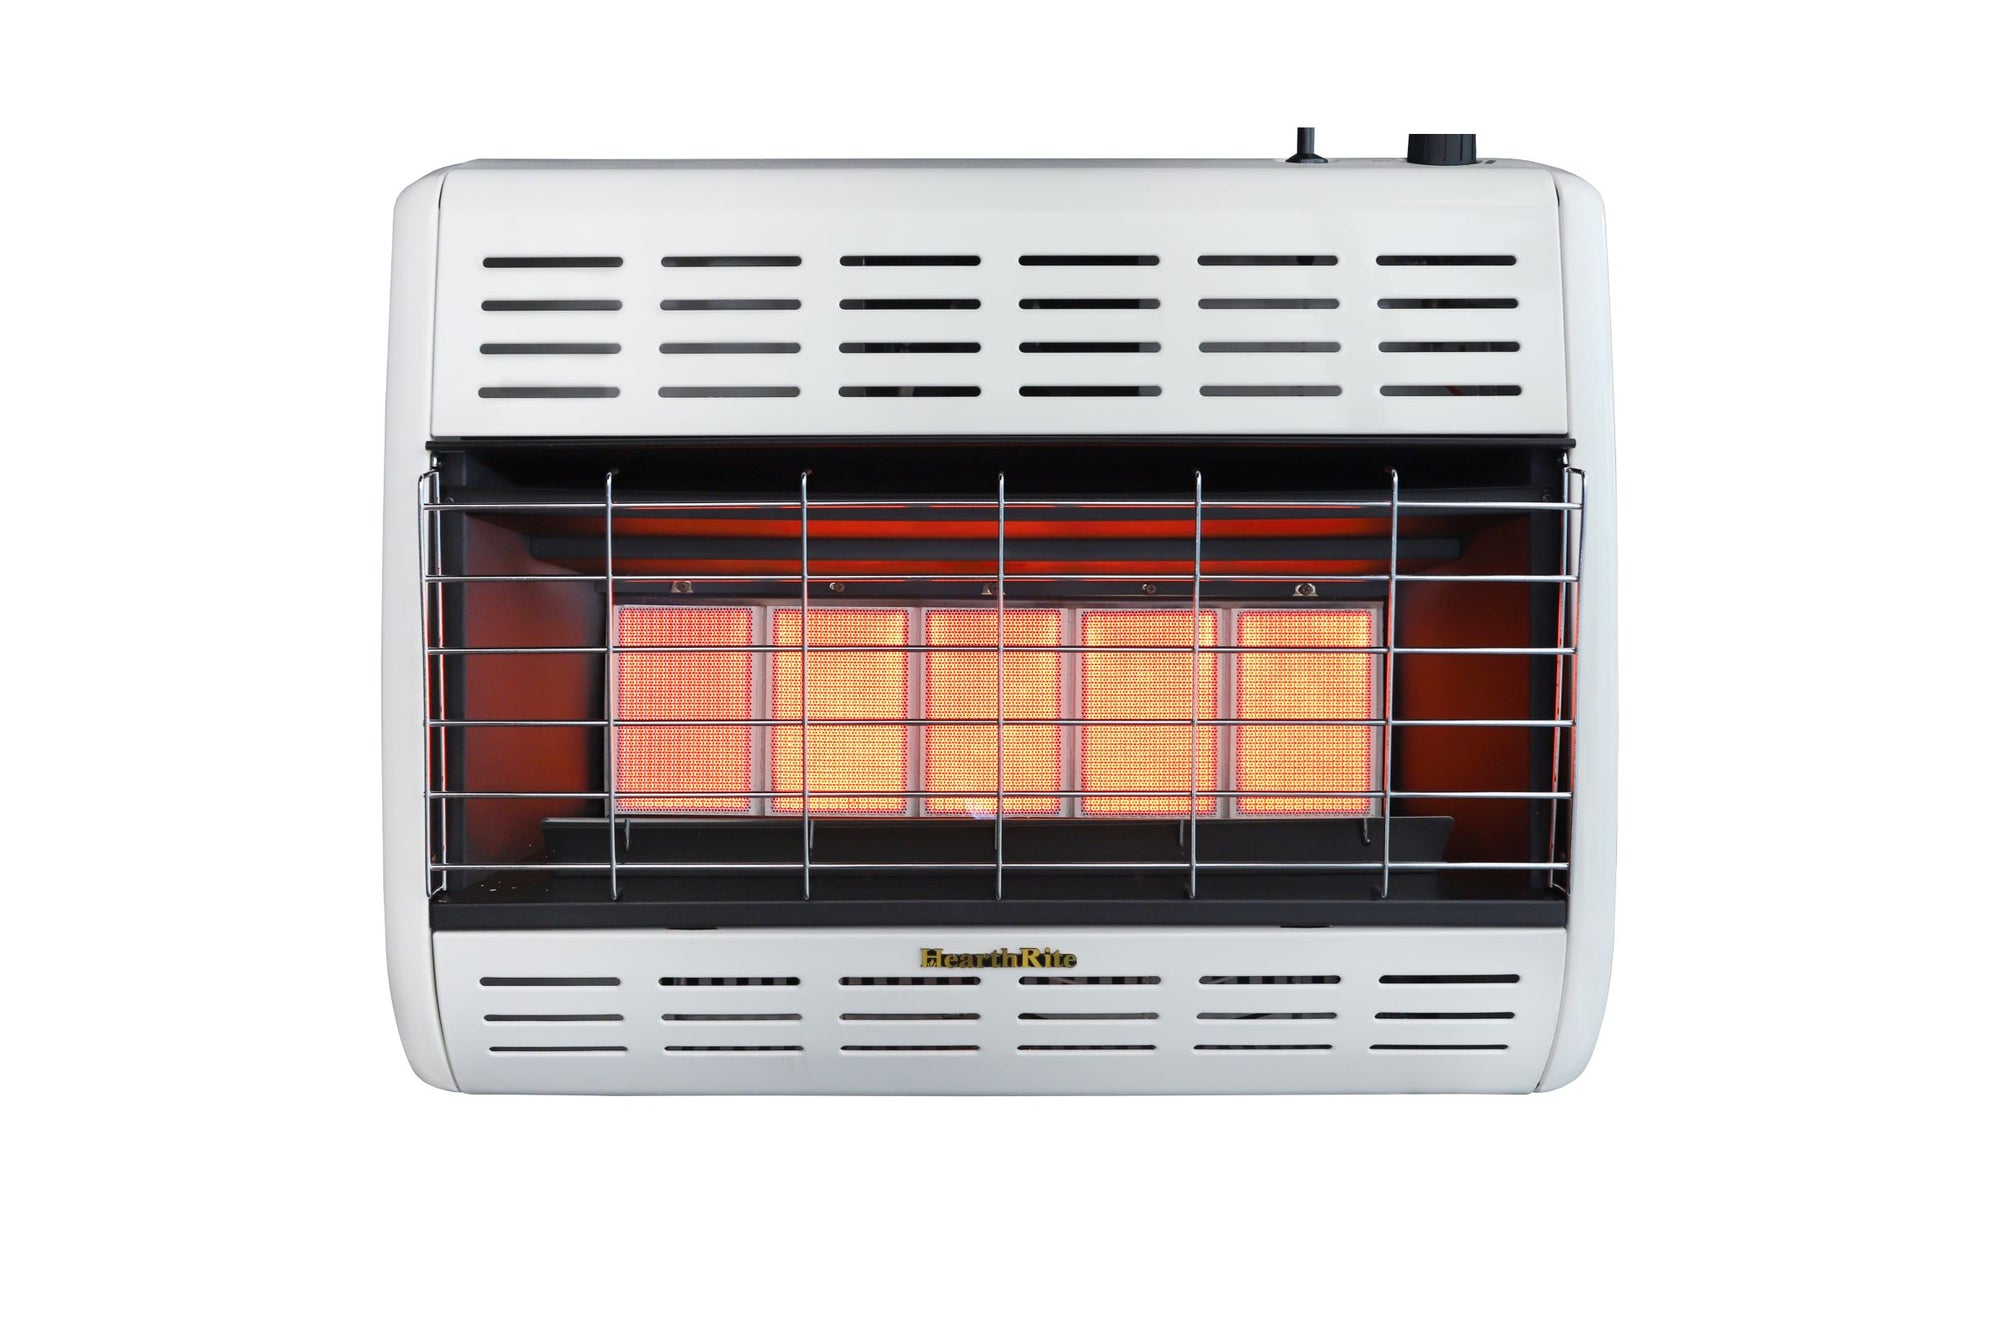 HearthRite Infrared Space Heater: 30,000 BTU unit with optional thermostat or manual ignition, designed for room object heating